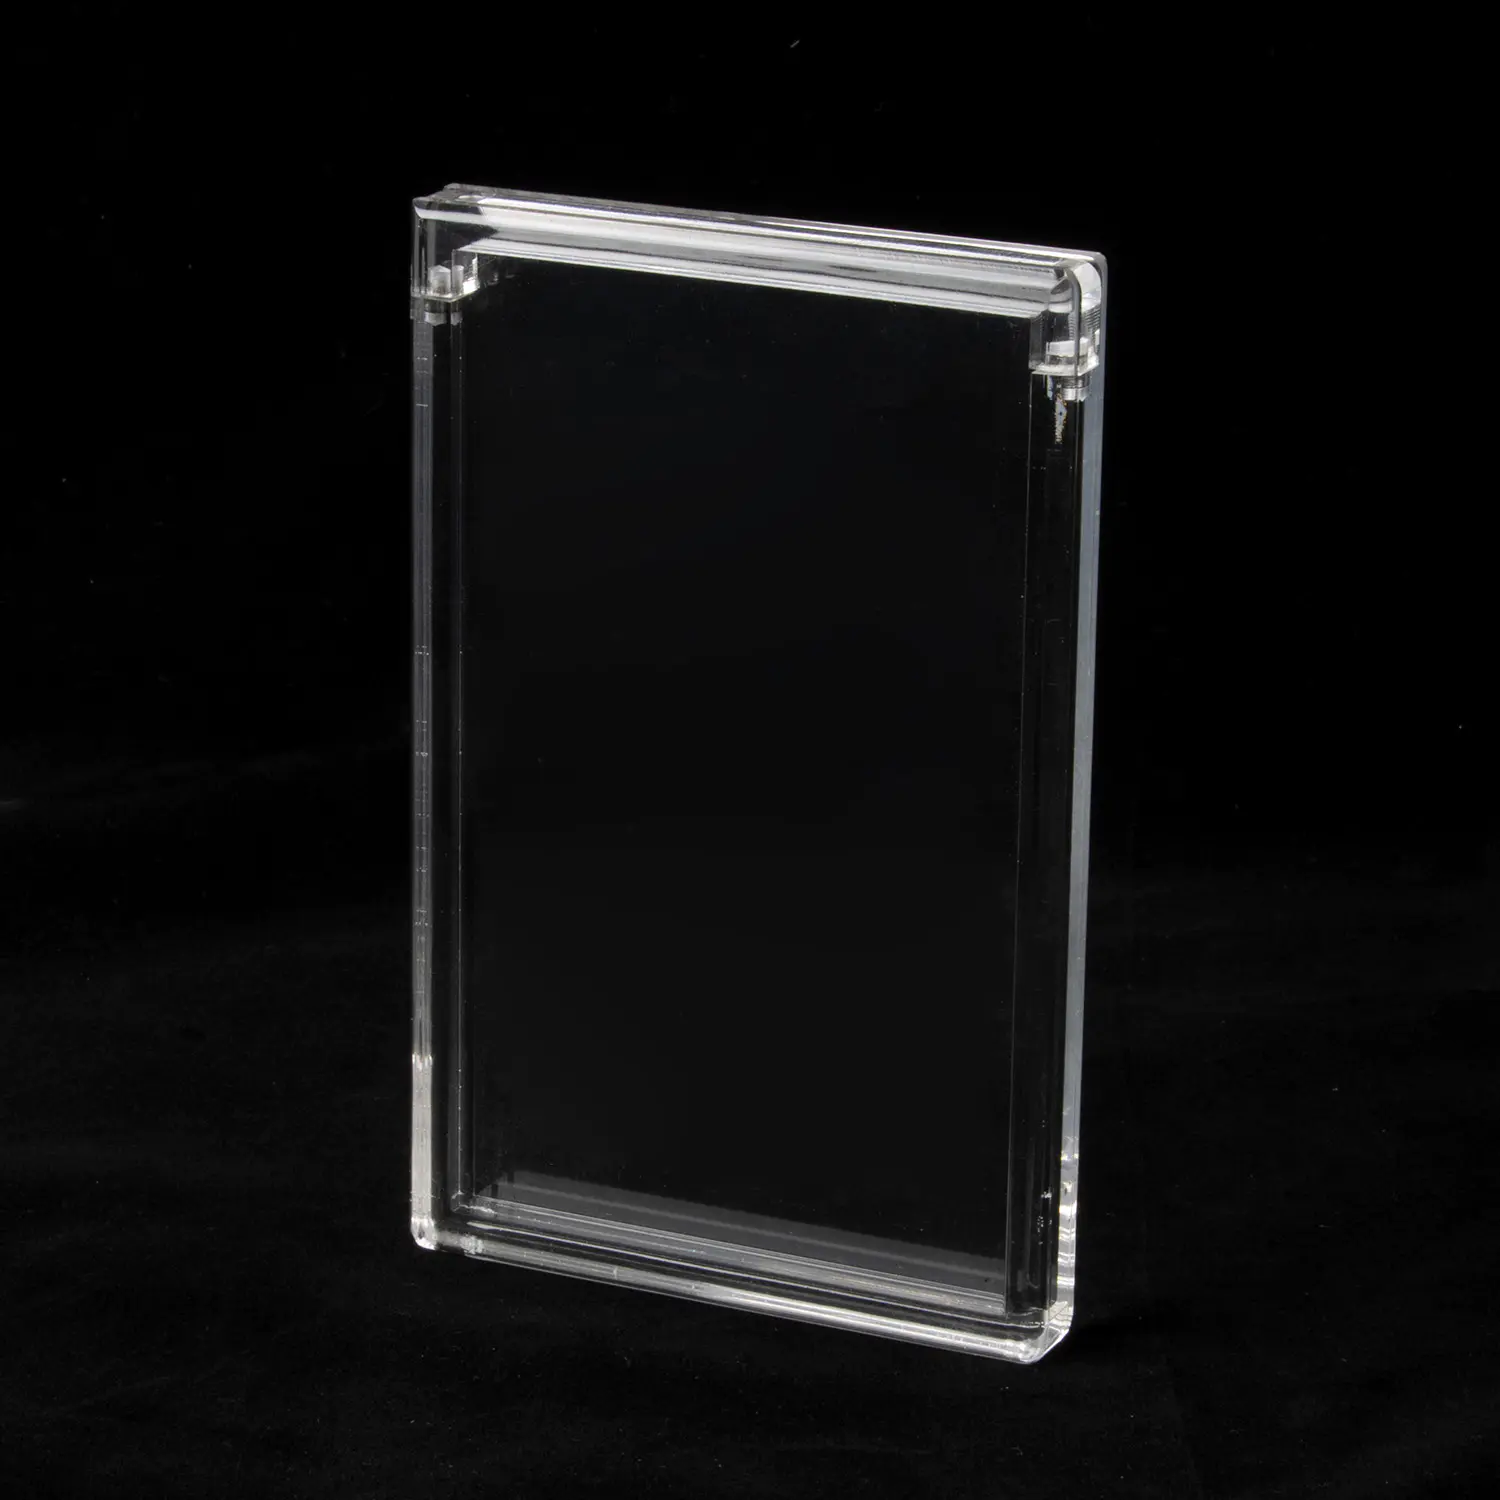 Acrylic Magnetic Booster Pack Display Case Fits Pokemon Booster Packs